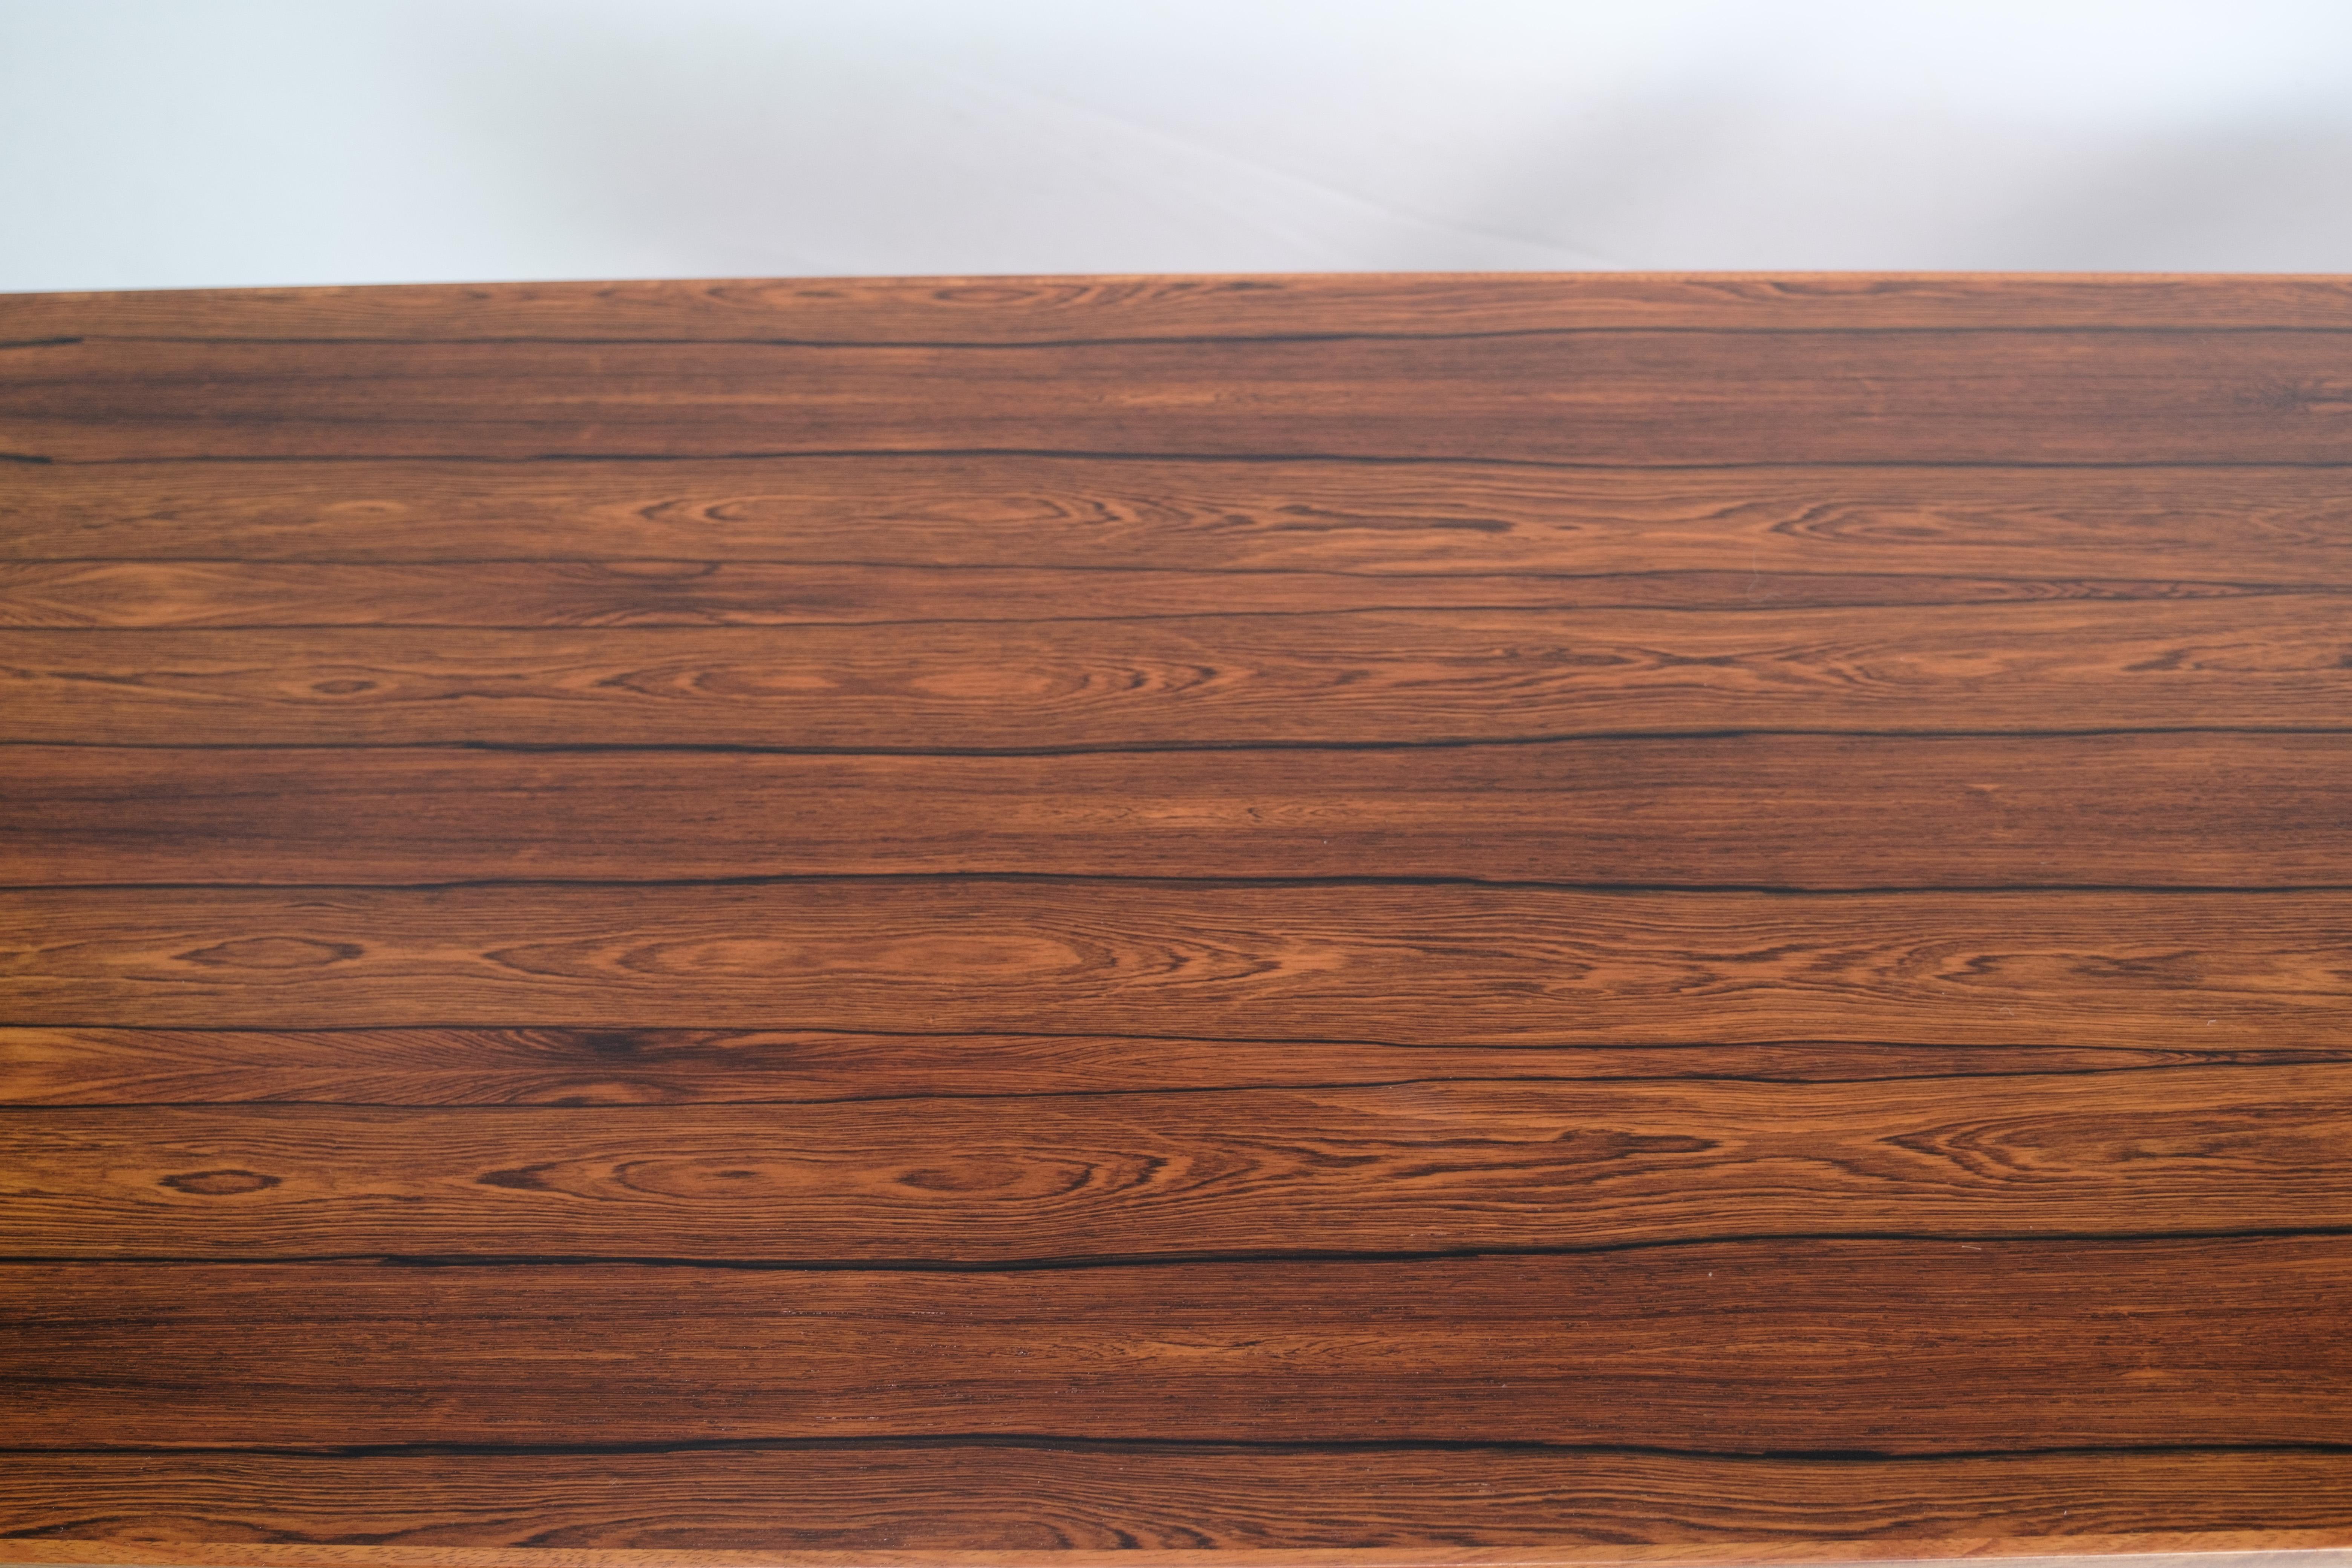 Mid-Century Modern Coffee Table Made In Rosewood By Kai Kristiansen From 1960s For Sale